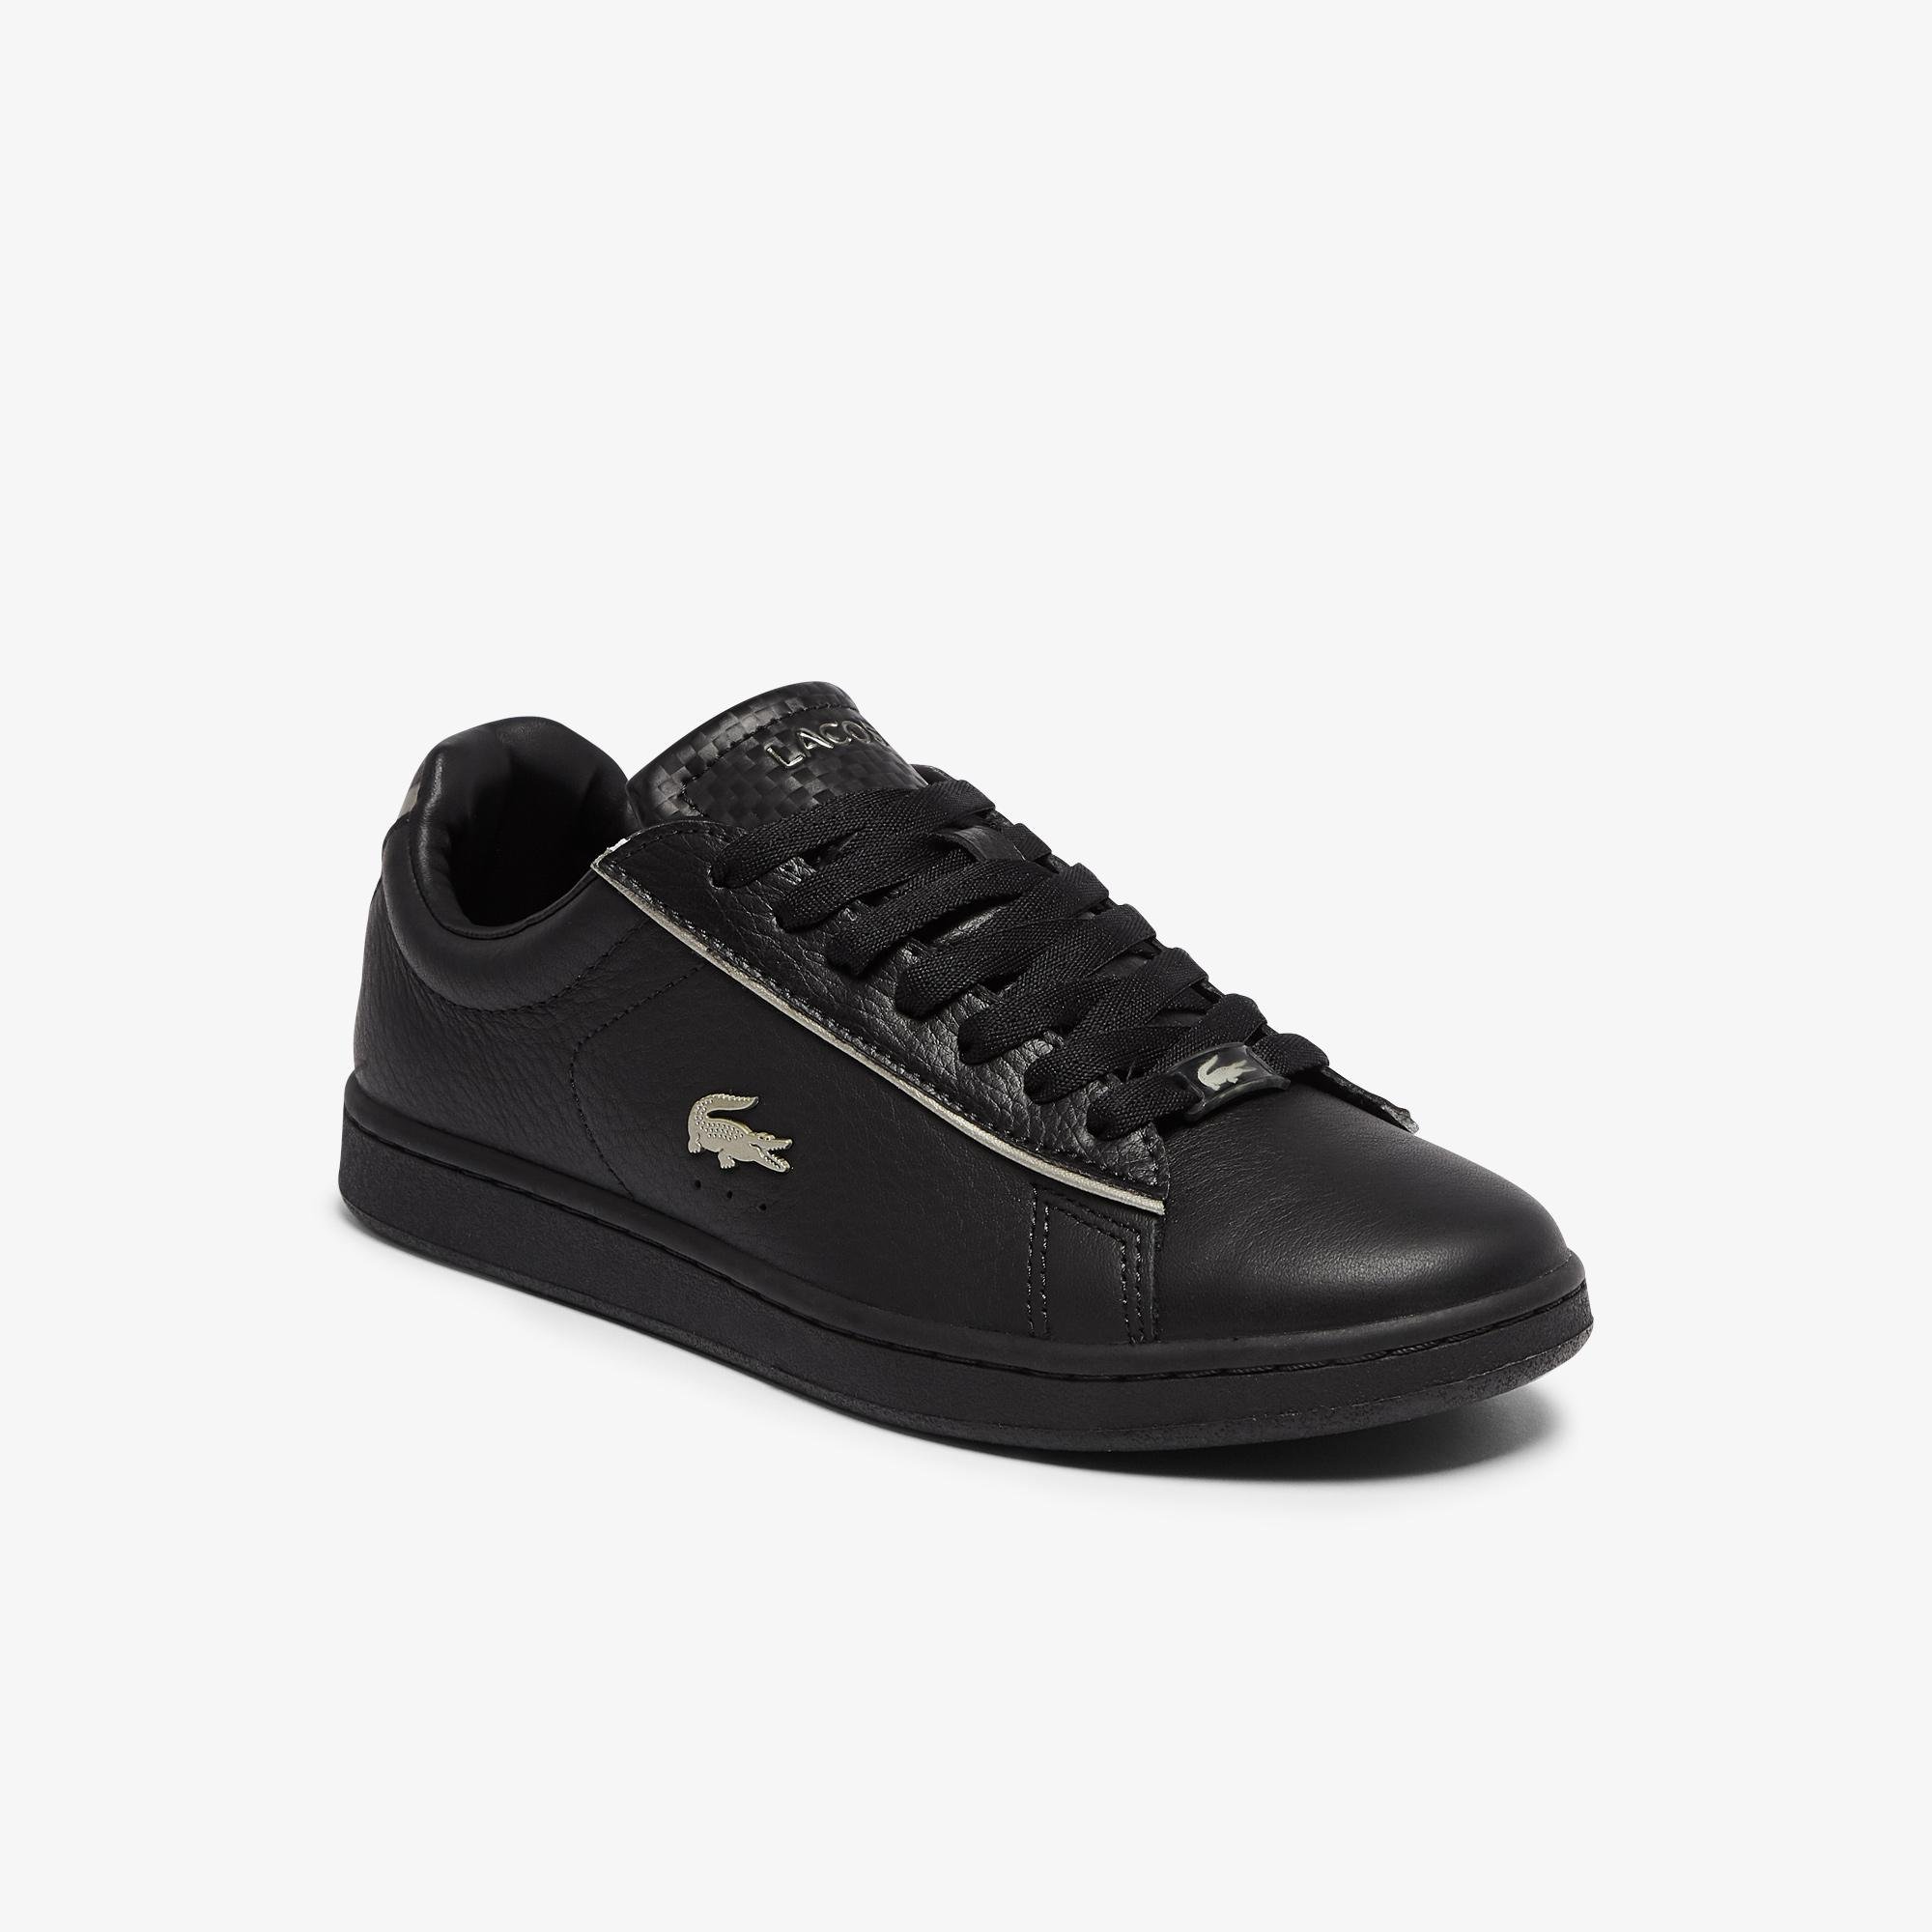 Lacoste Women's Carnaby Evo Leather Platinum Detailing Trainers